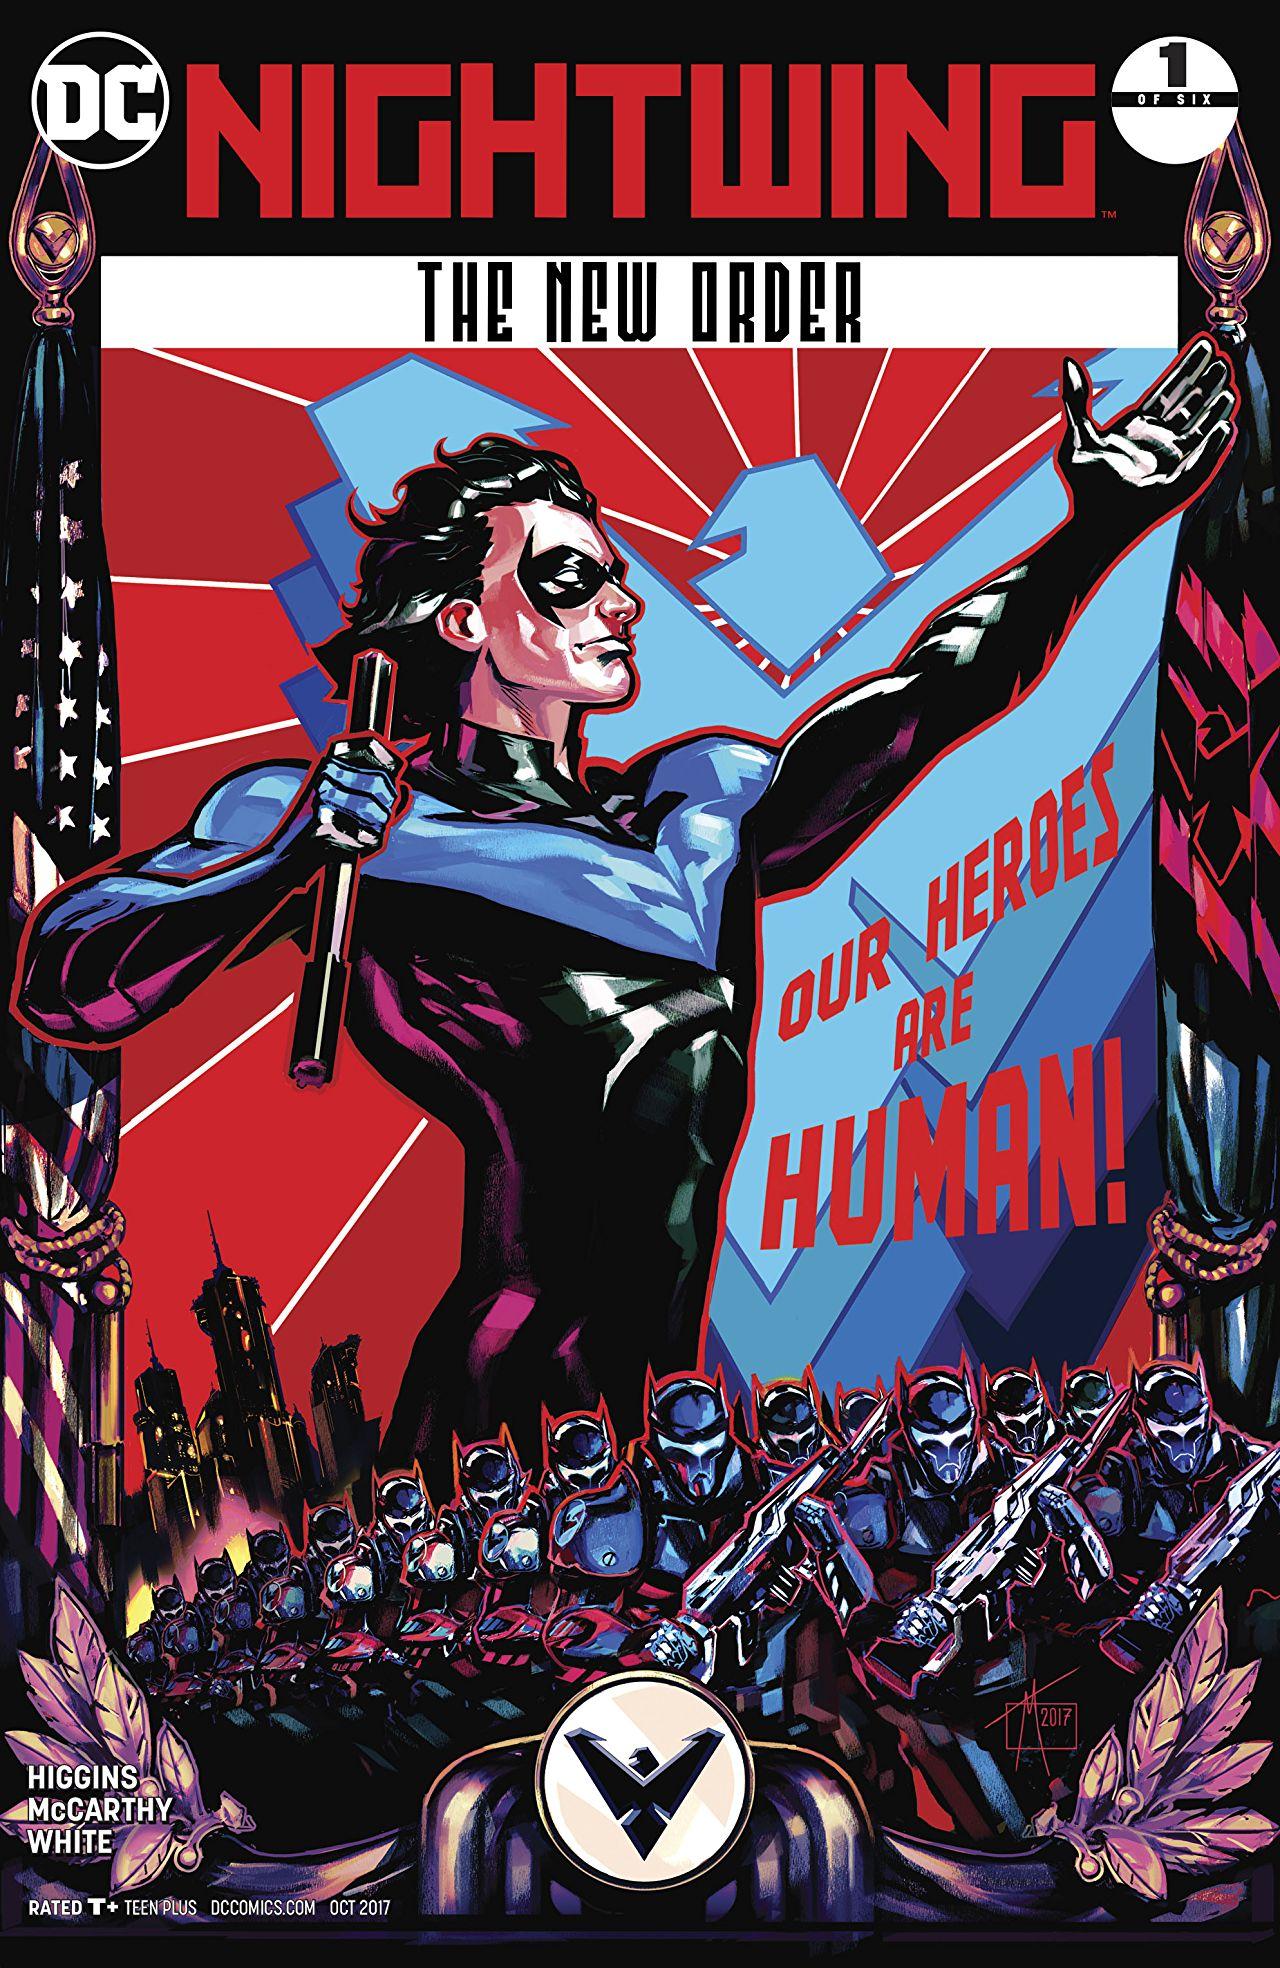 Nightwing: The New Order Vol. 1 #1